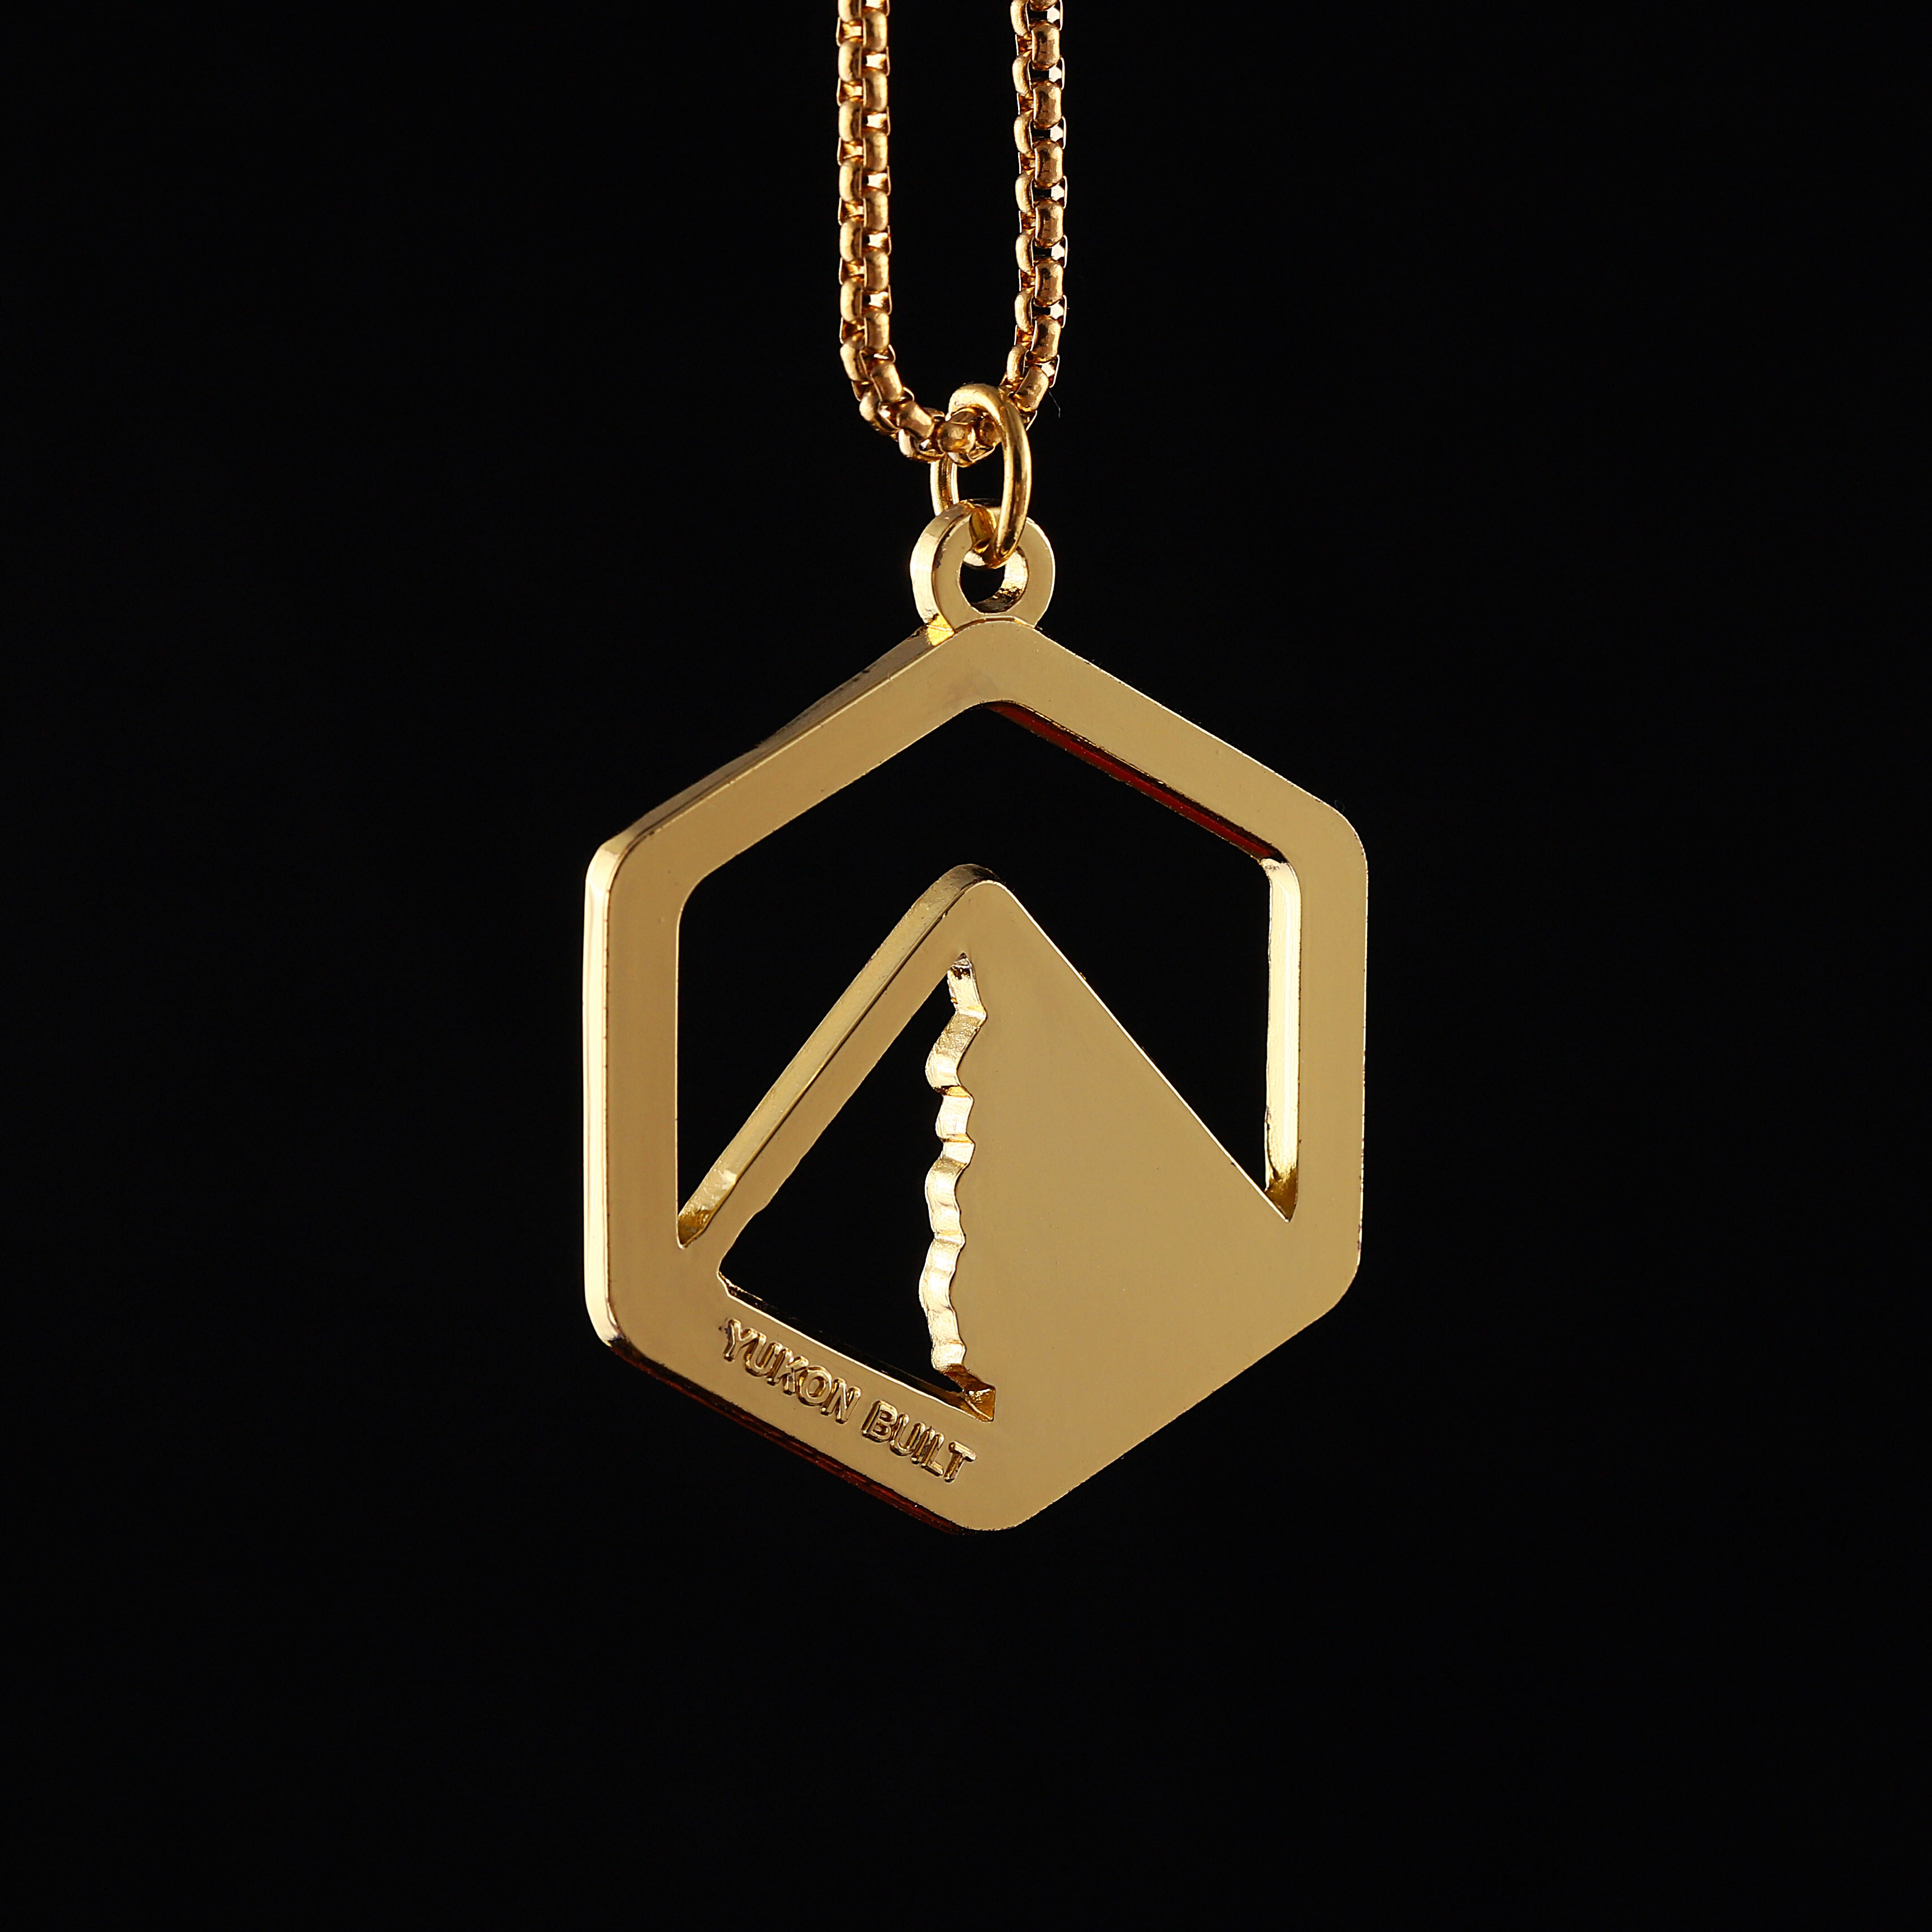 Custom Metal Alloy Gold Necklace for Clothing